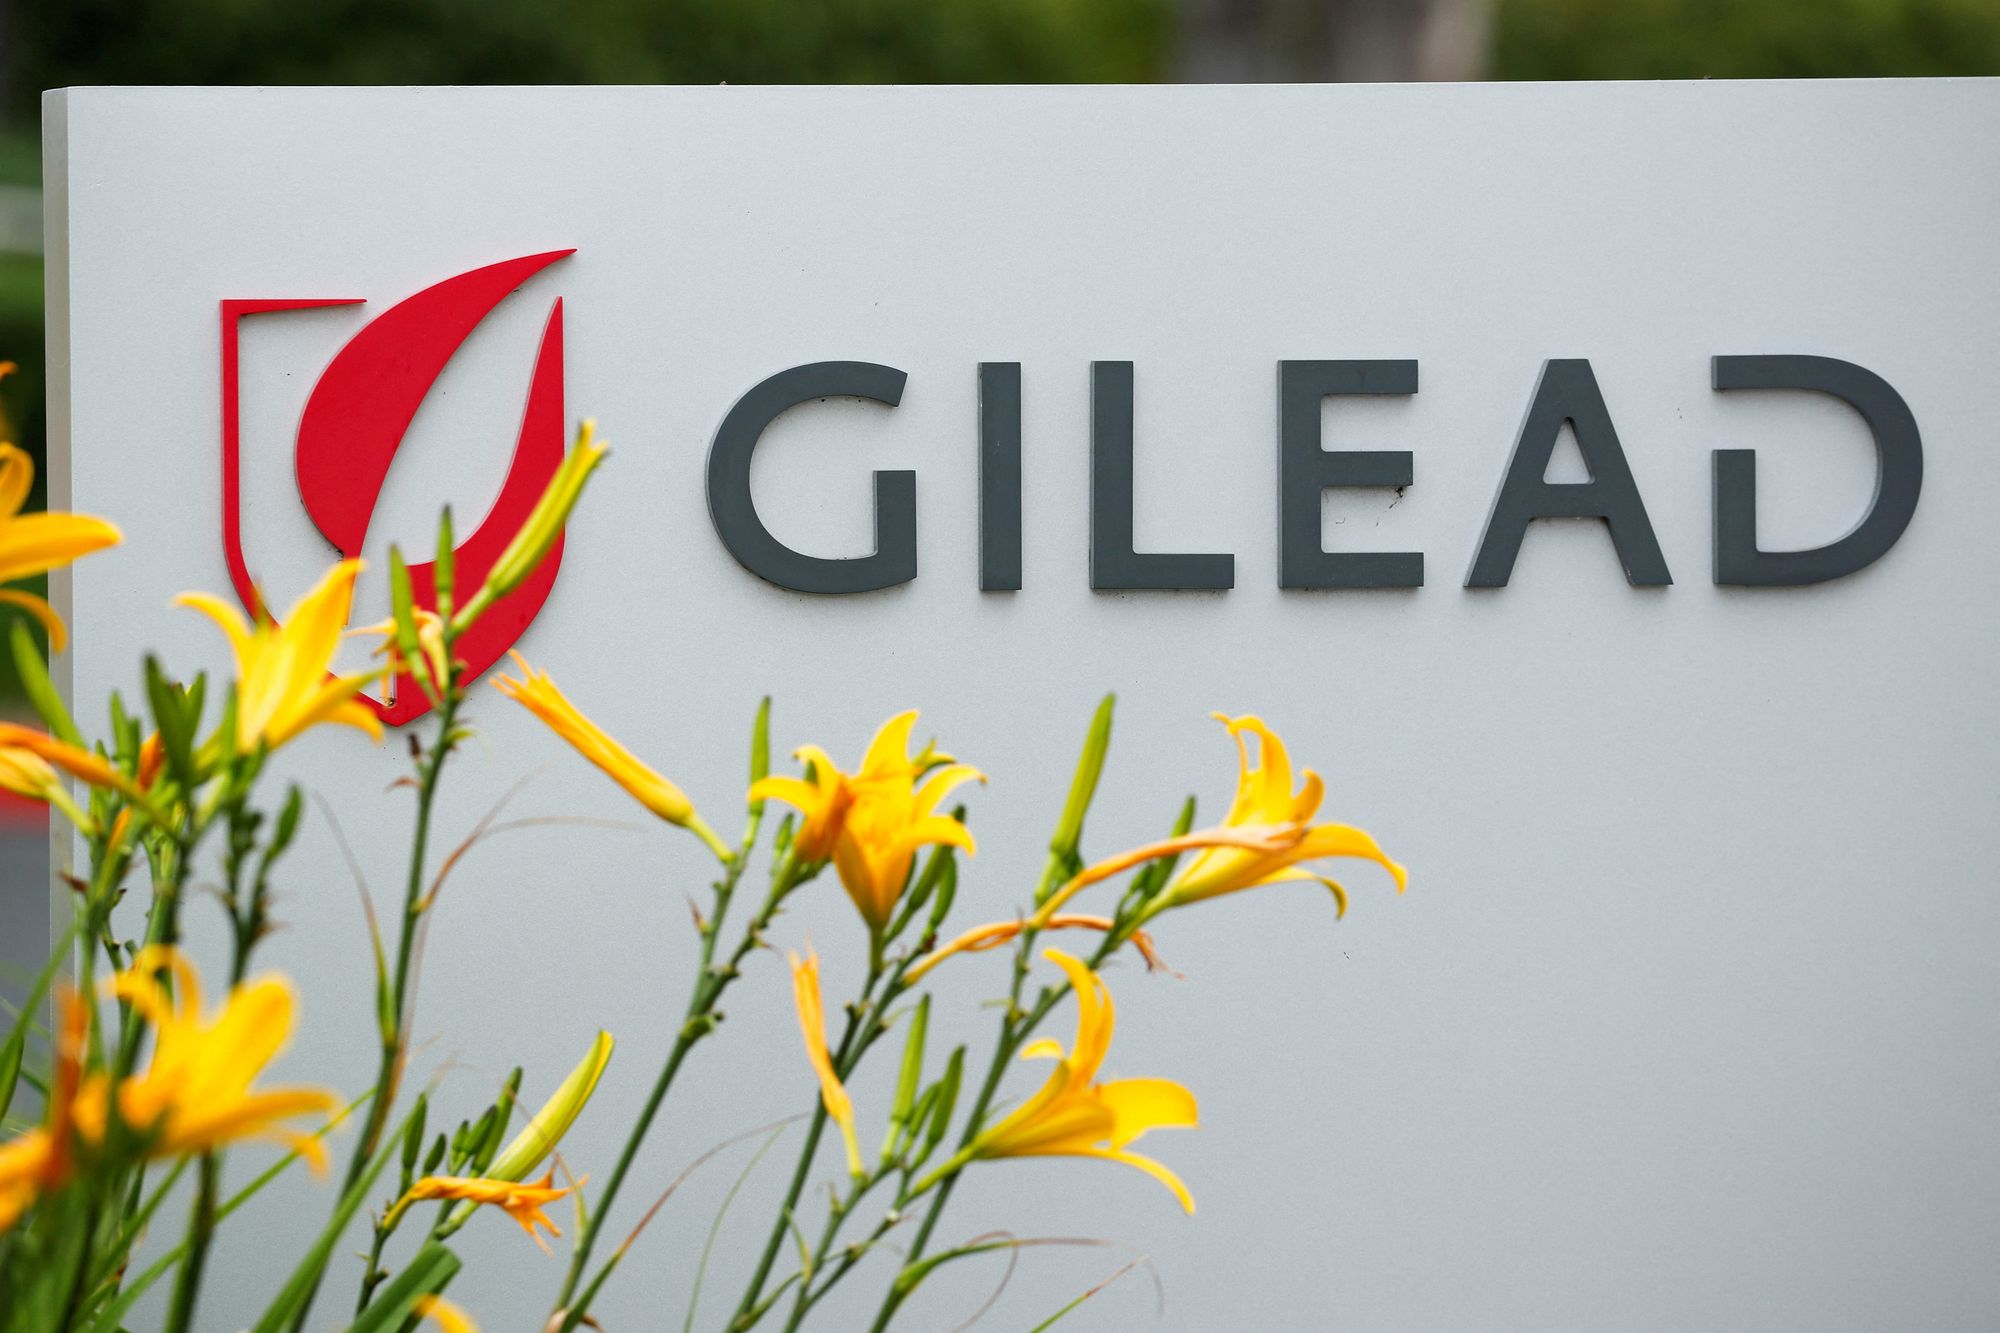 Gilead is sued by the CDC over HIV drug patent